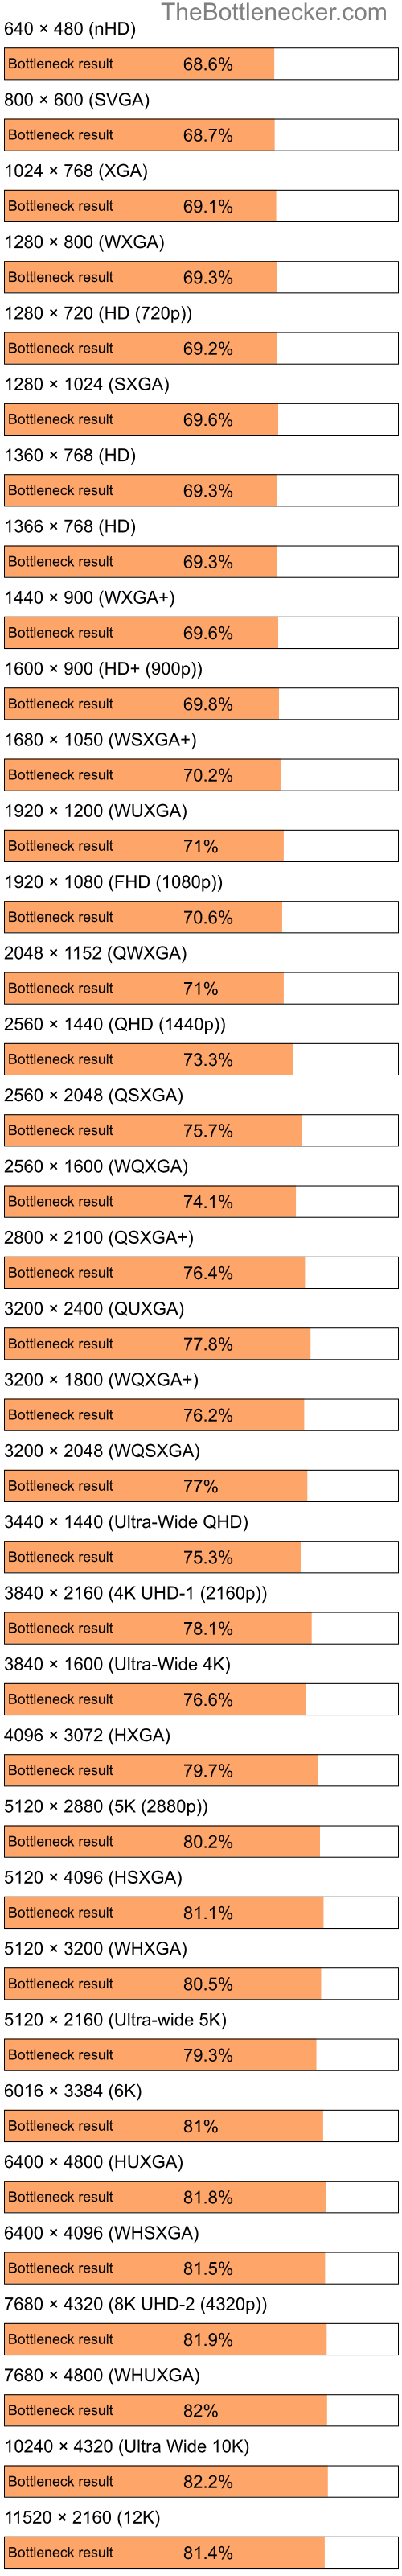 Bottleneck results by resolution for Intel Celeron M 410 and NVIDIA GeForce GT 320M in Graphic Card Intense Tasks